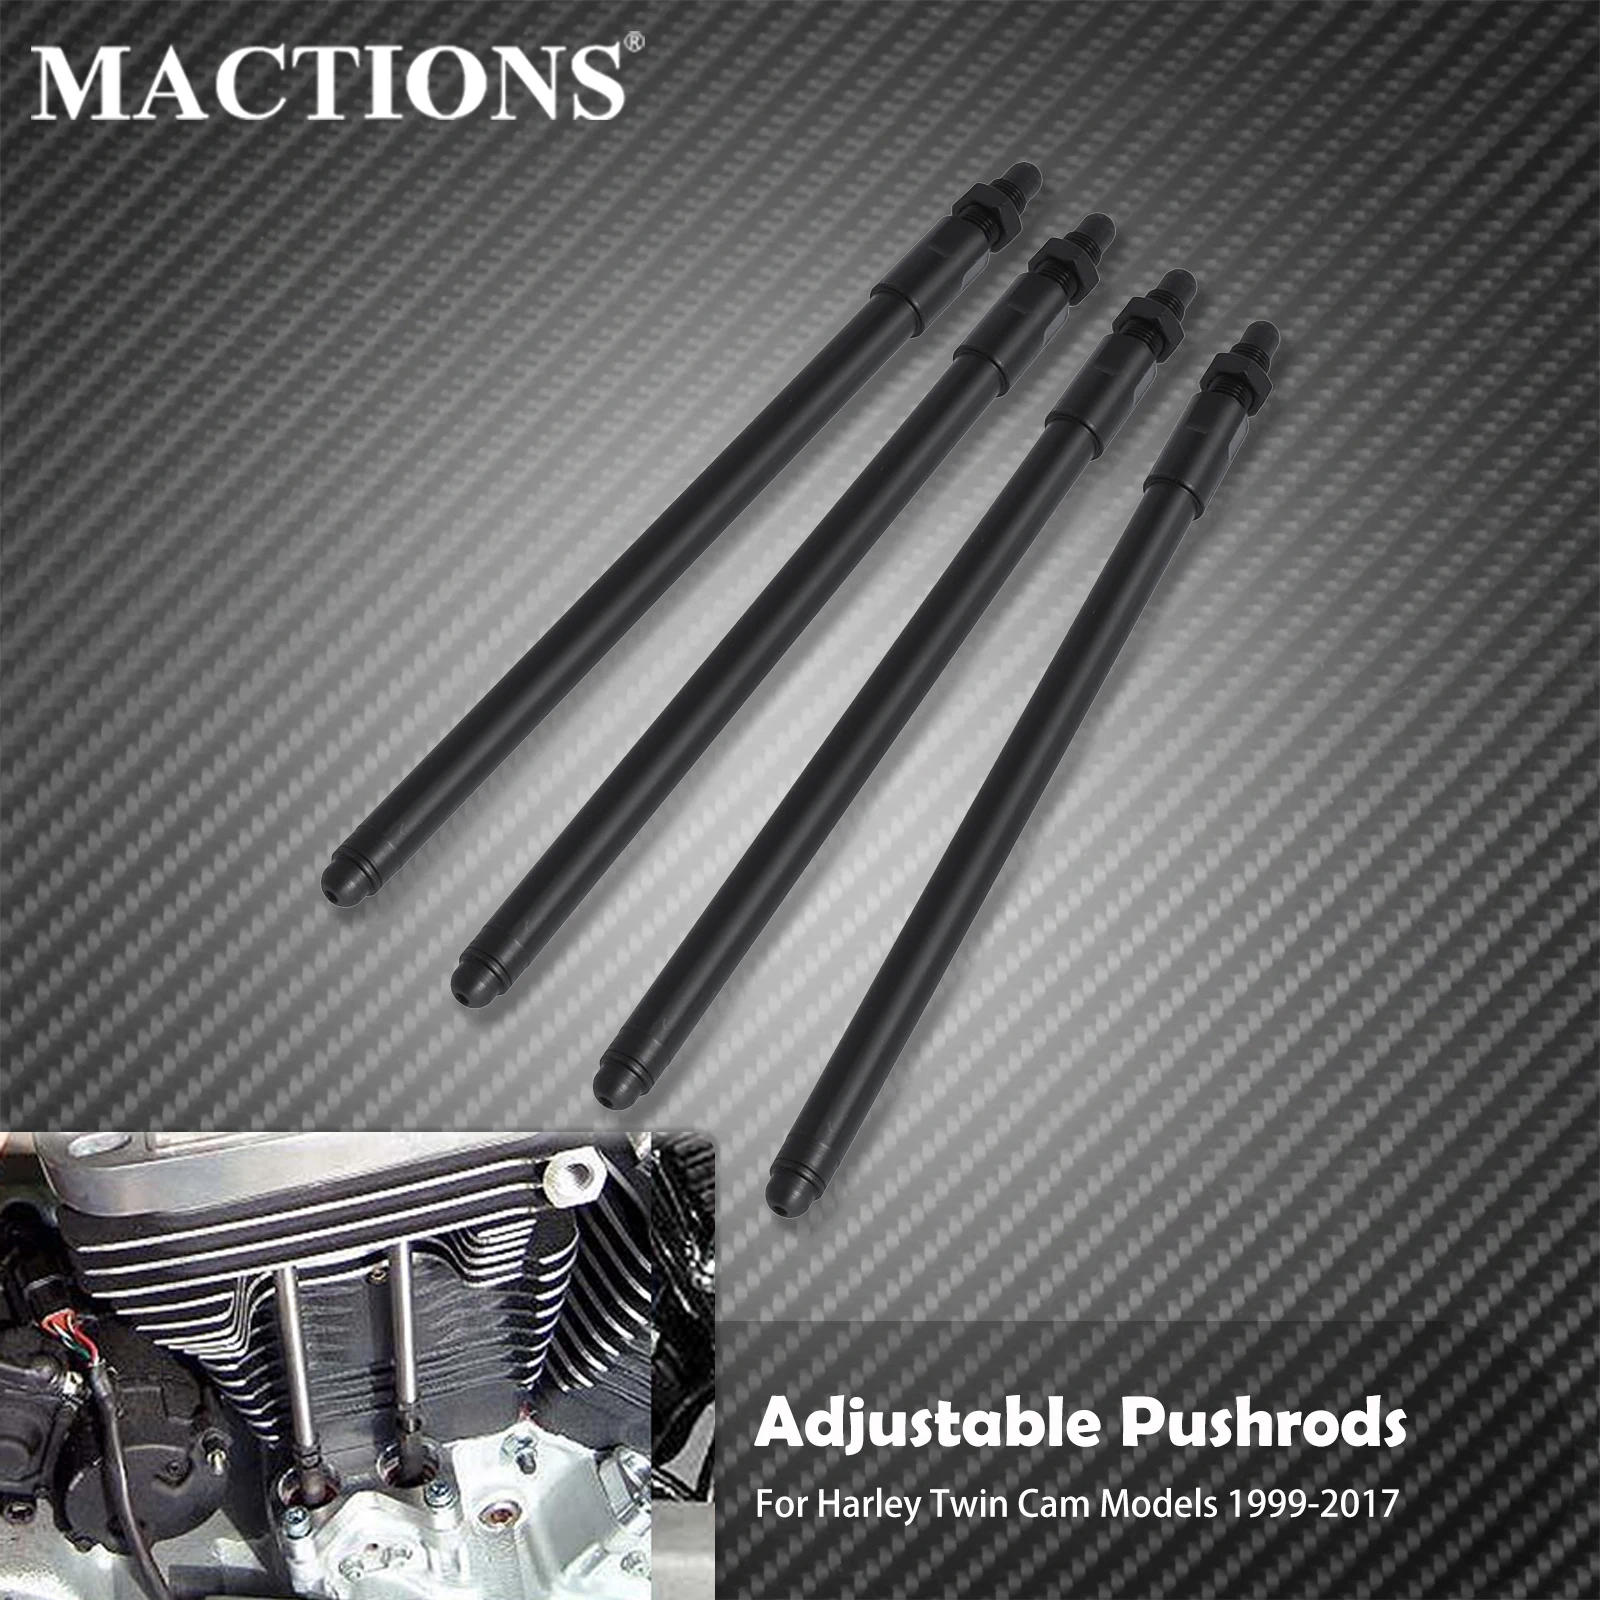 

4PCS Motorcycle Adjustable Pushrods Black For Harley Twin Cam Models Softail Fatboy Touring Electra Road Glide Dyna FXBB 1999-17